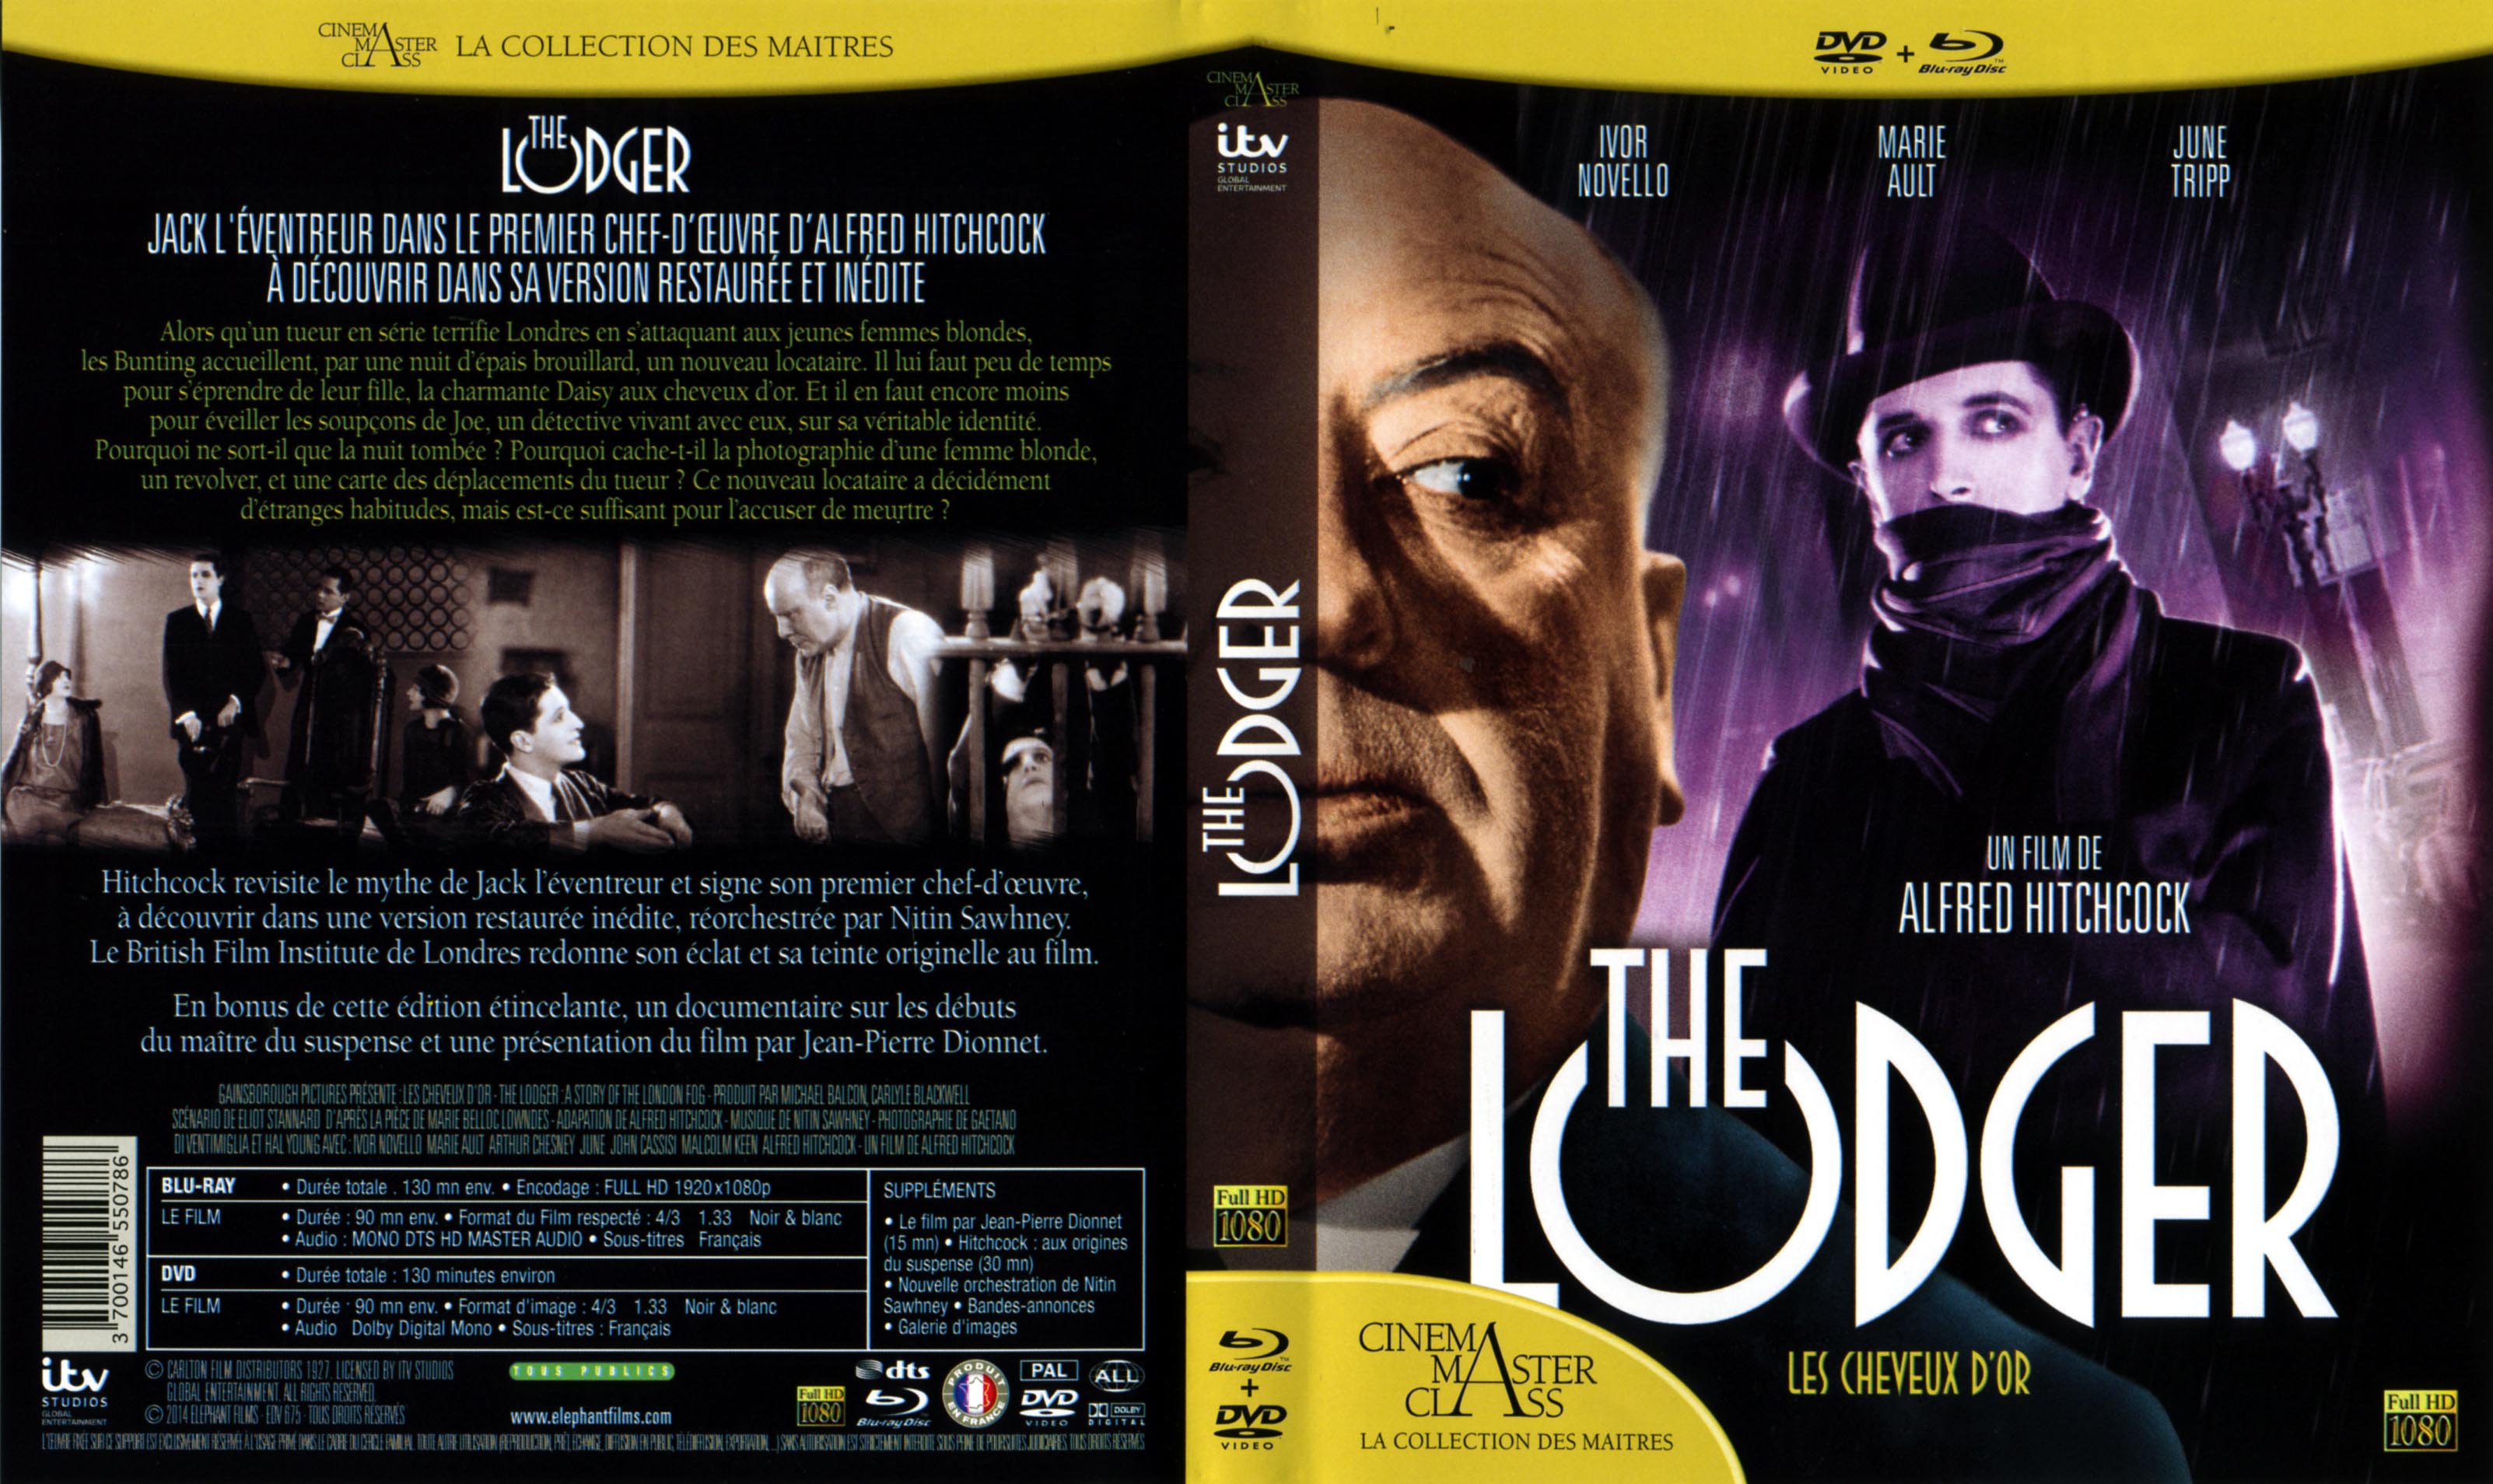 Jaquette DVD The lodger (BLU-RAY)